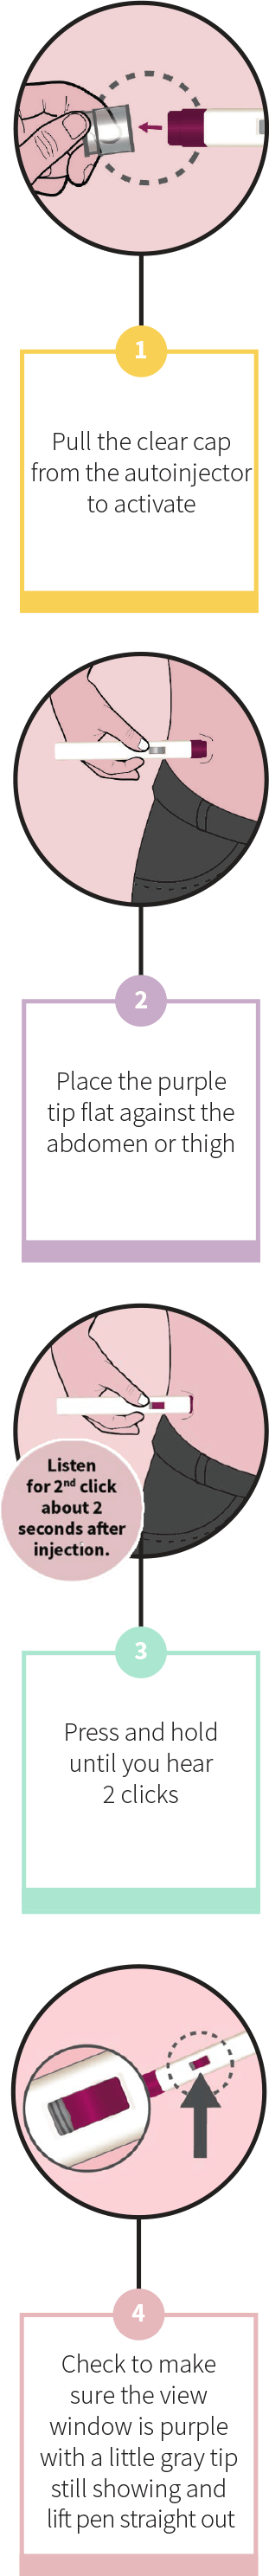 To administer Vyleesi, pull the clear cap from the autoinjector to activate. Place the purple tip flat against the abdomen or thigh. Press and hold until you hear 2 clicks. Check to make sure the view window is purple with a little gray tip still showing and lift pen straight out.